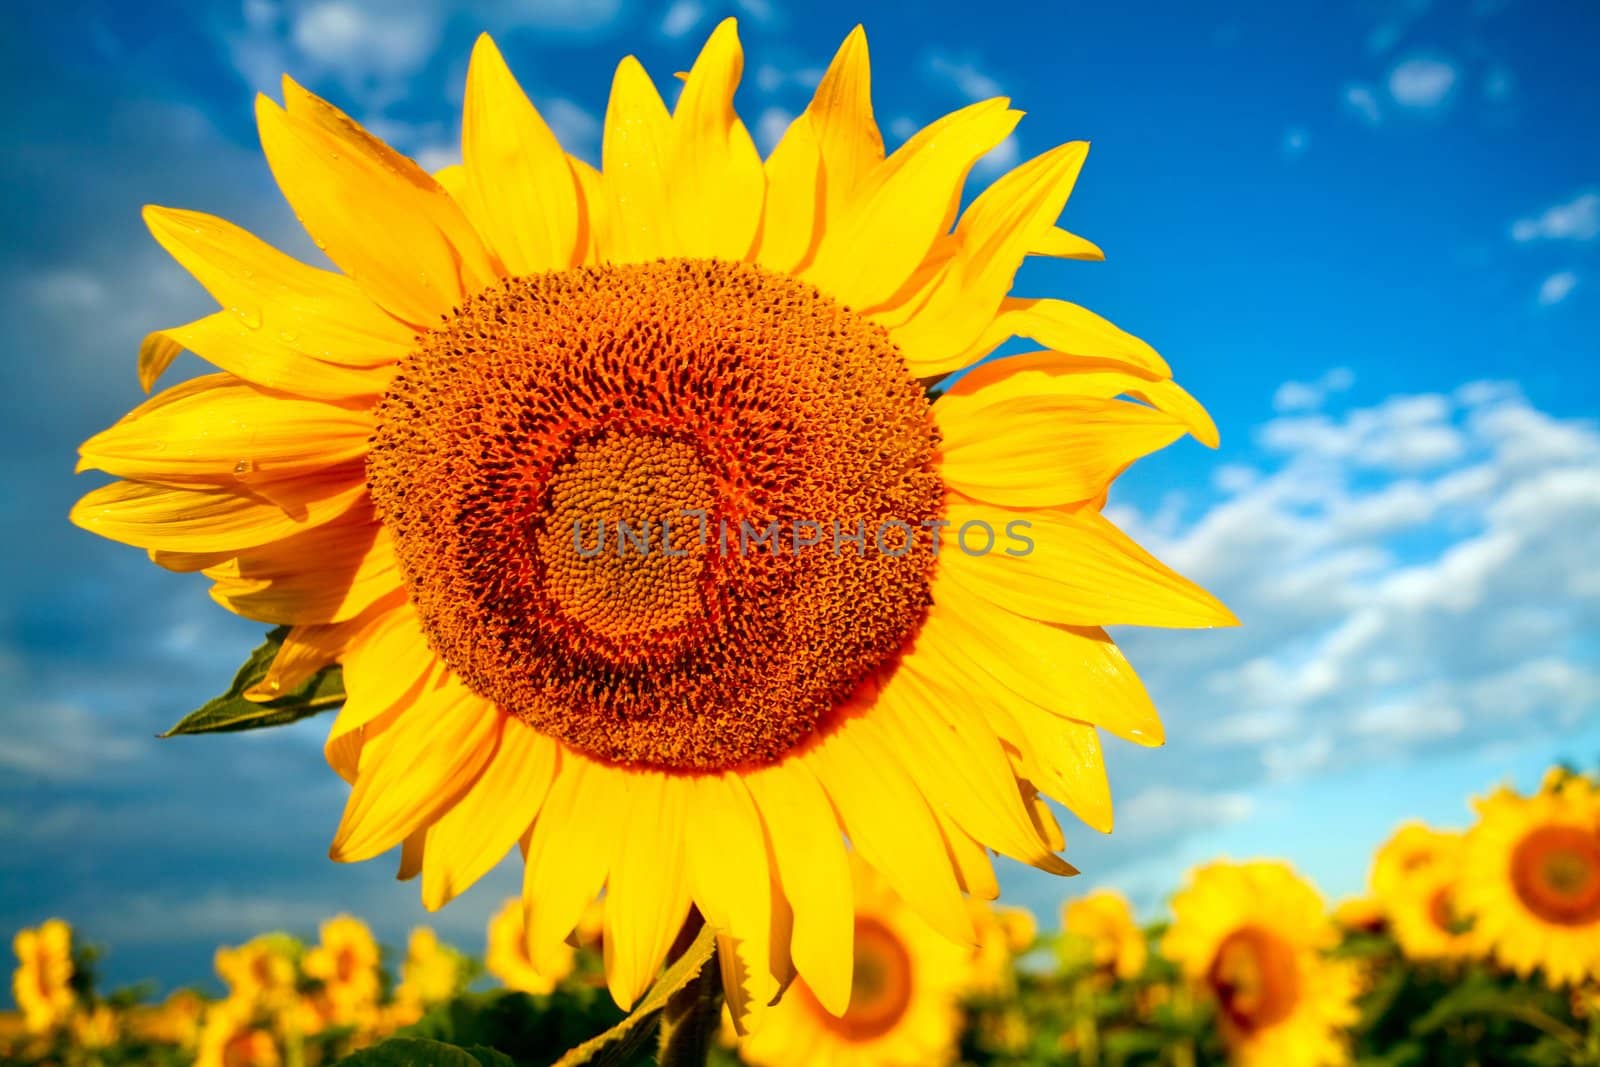 An image of yellow flower on background of blue sky